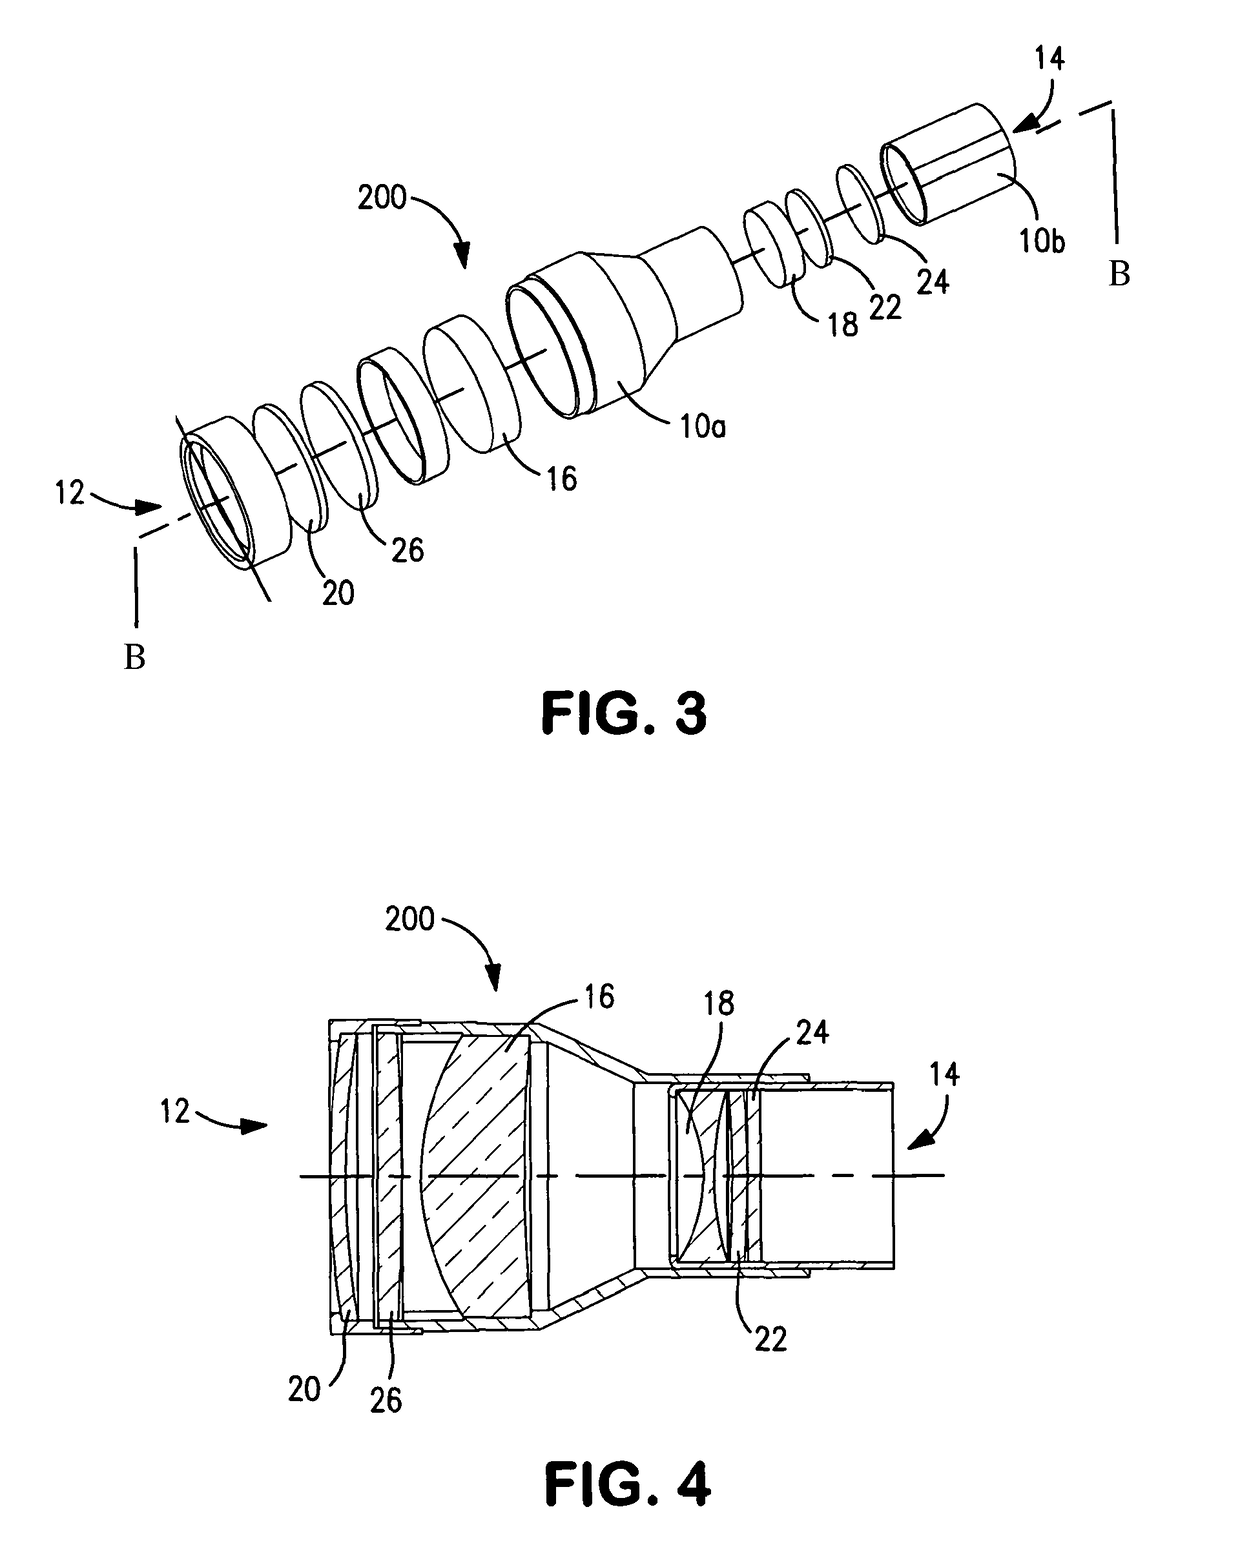 Magnification device and assembly